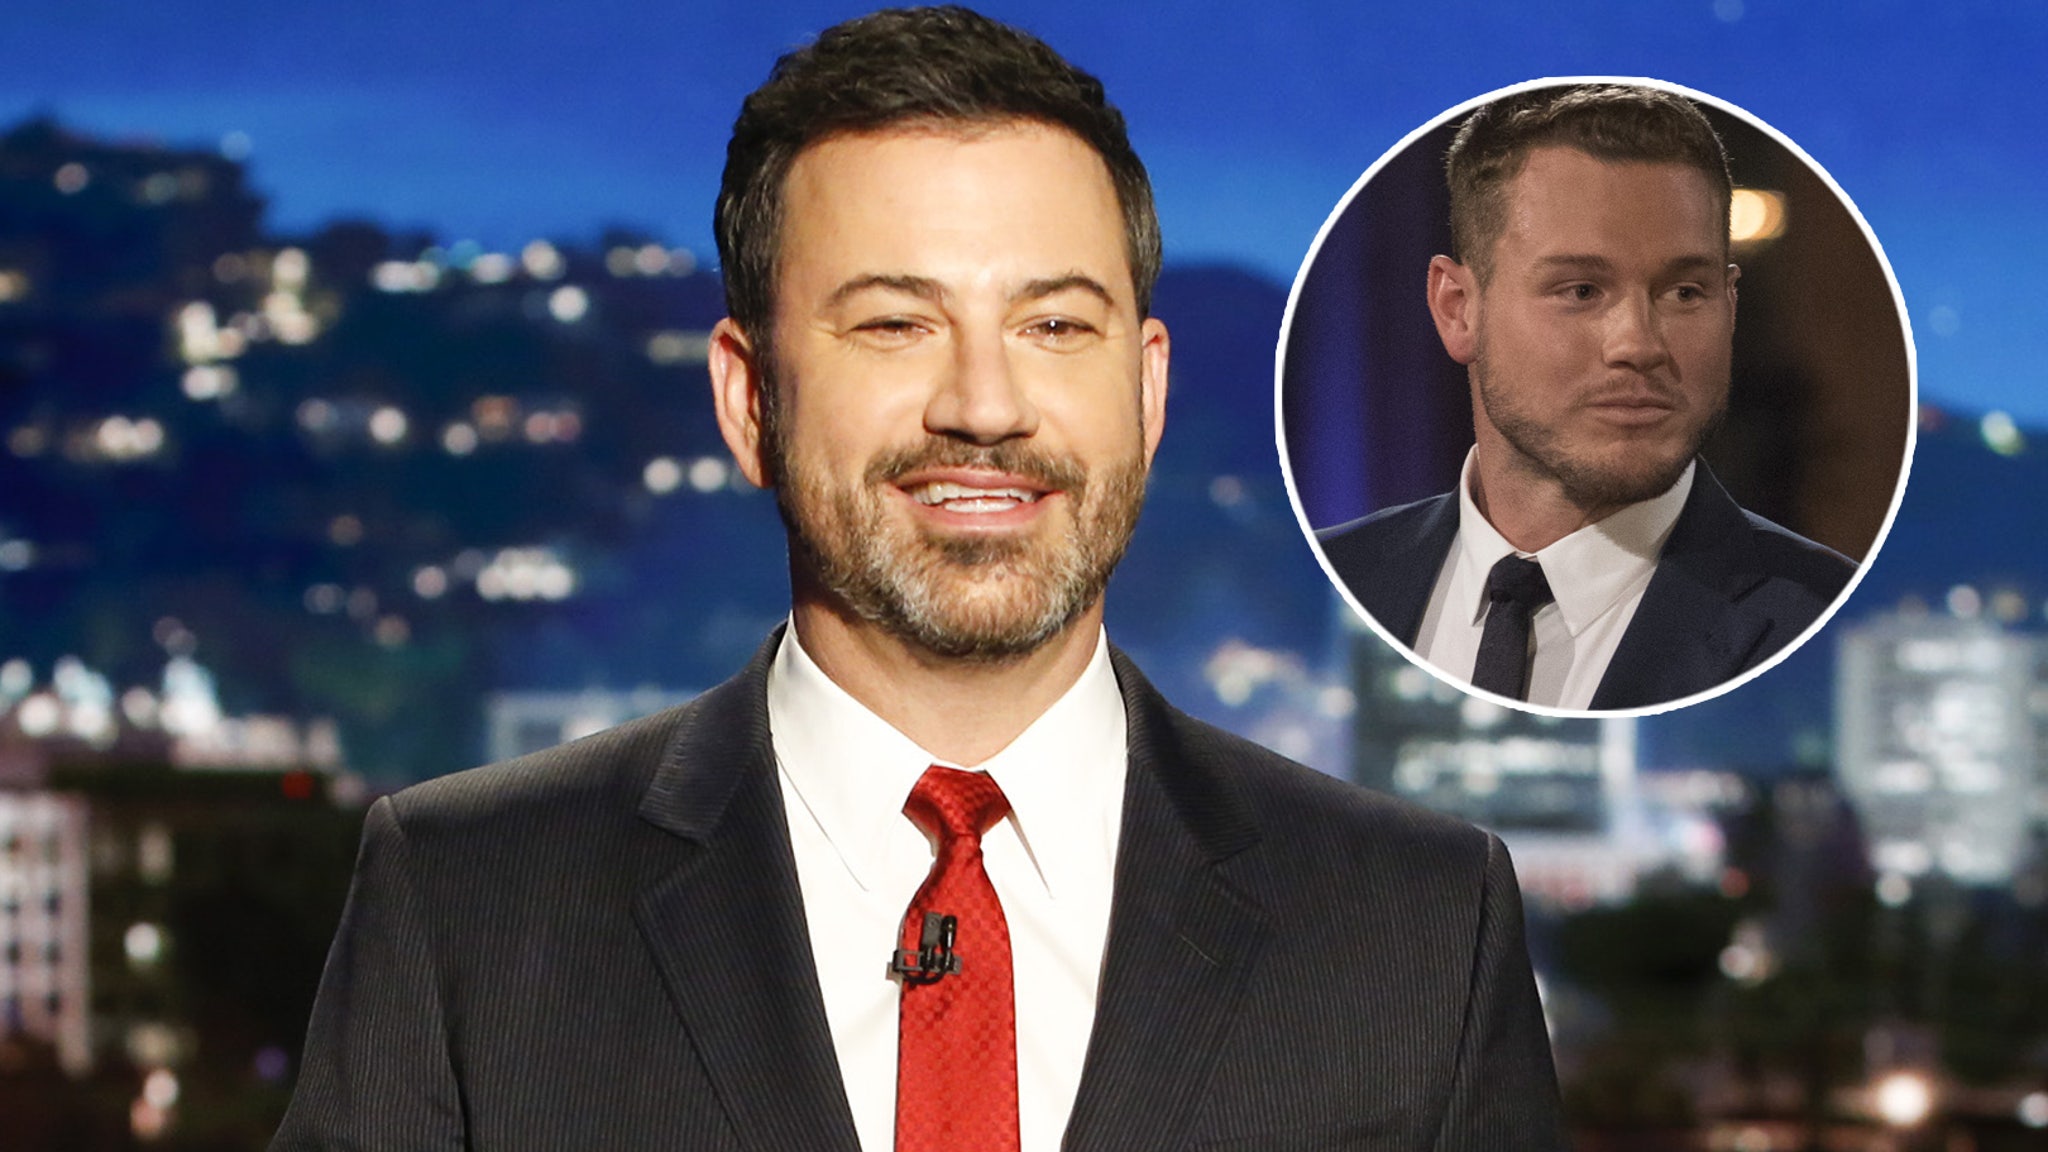 Jimmy Kimmel Predicts 'Bachelor' Final 4 and Who Will Ultimately Win